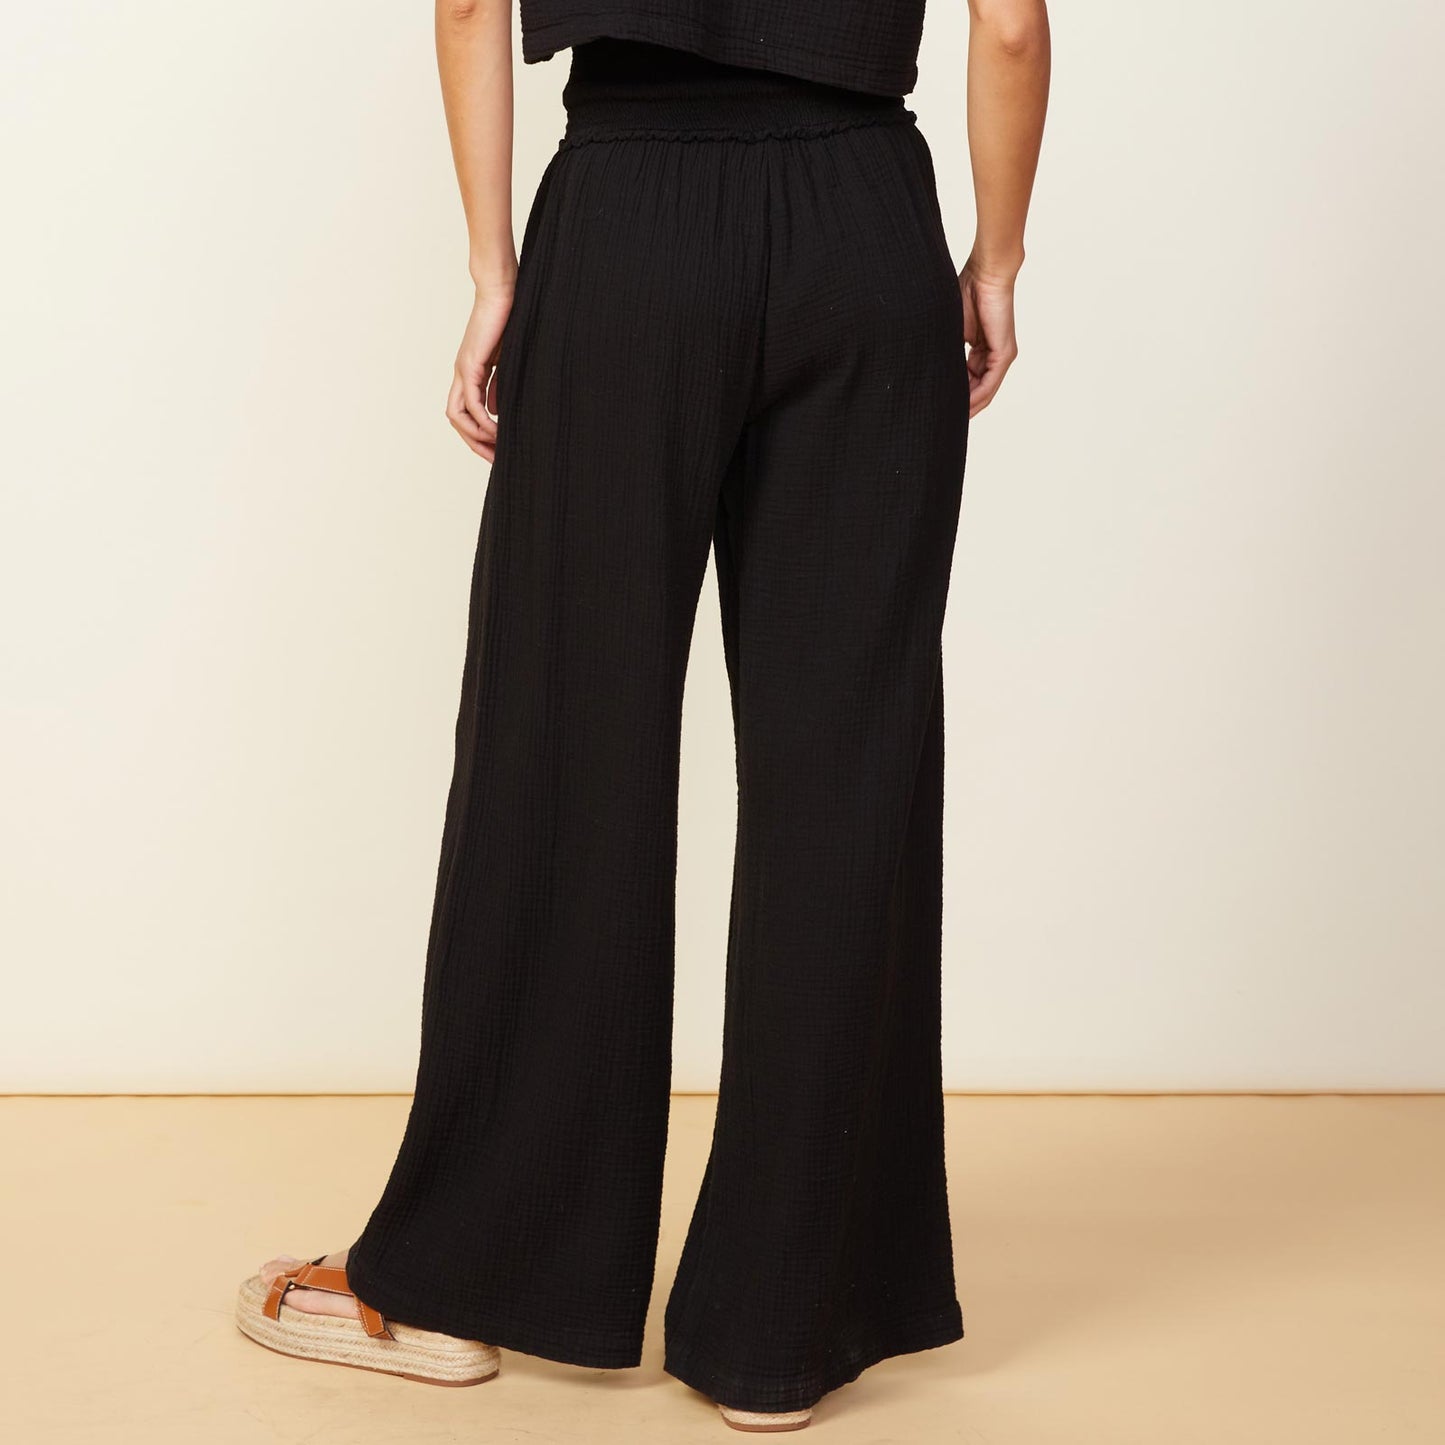 Back view of model wearing the gauze smocked flare pant in black.